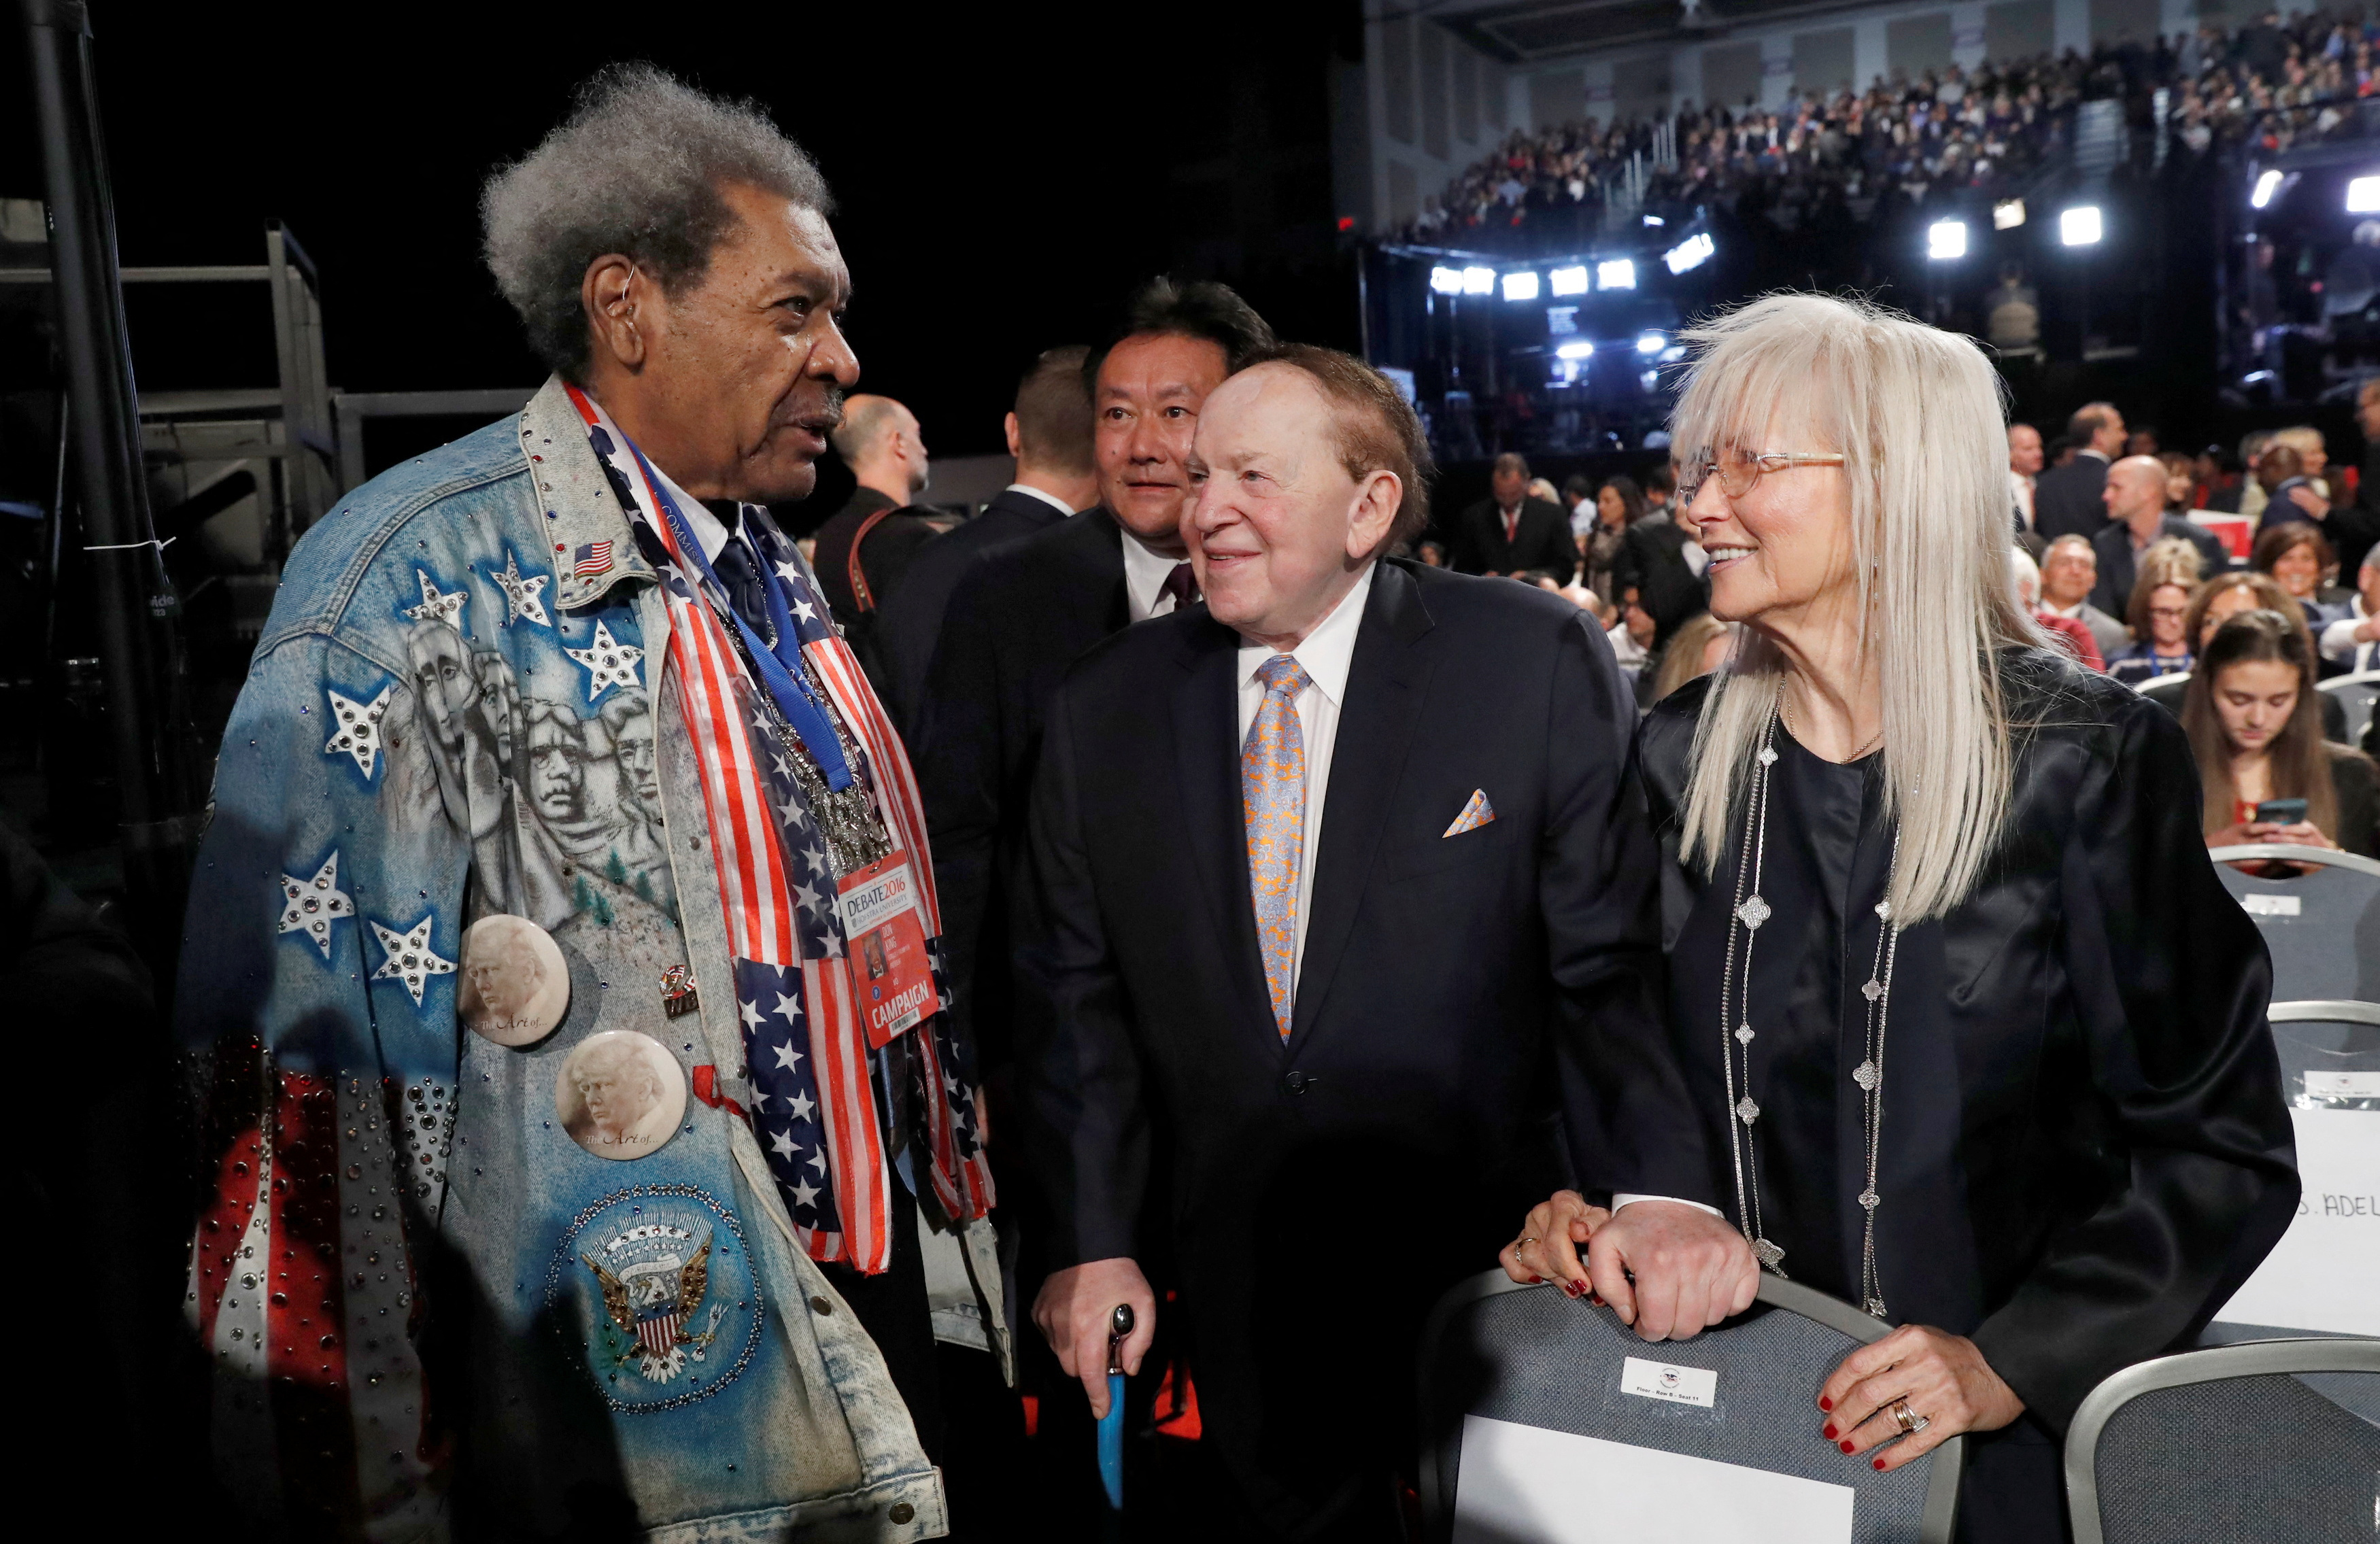 Boxing promoter Don King talks with fellow Donald Trump supporters Casino owner Sheldon Adelson and his wife Miriam before the start of the first U.S. presidential debate at Hofstra University in Hempstead